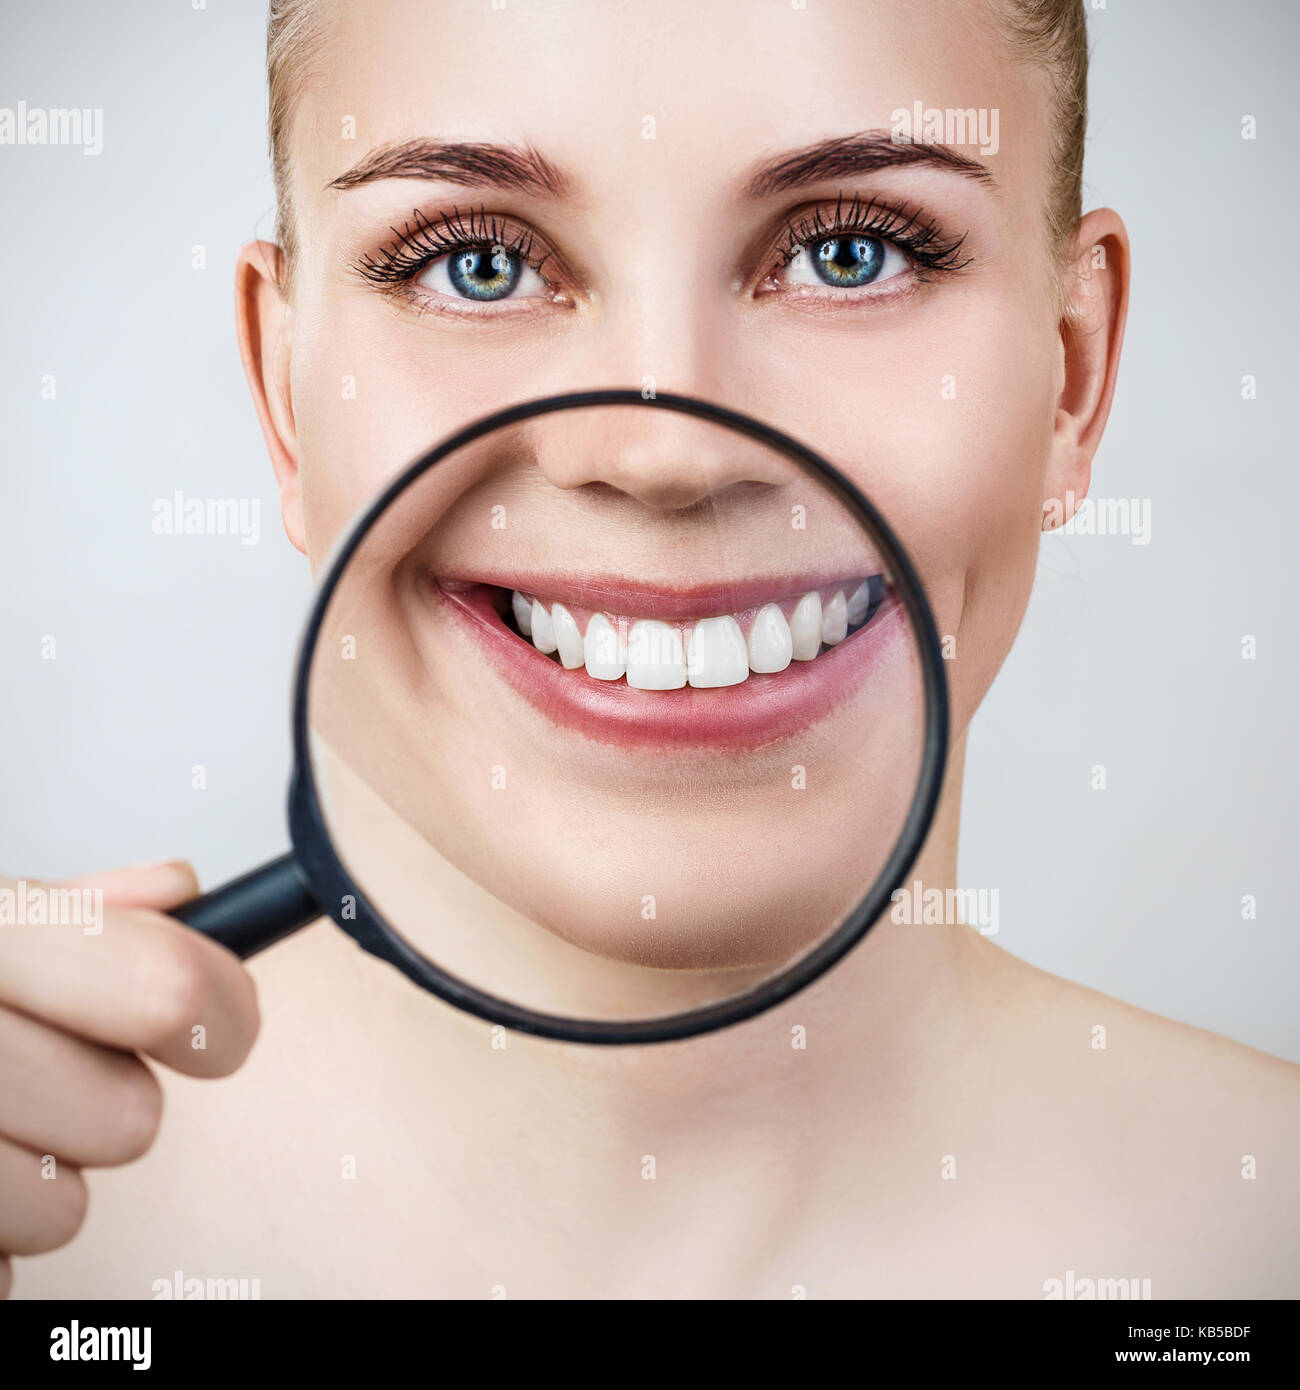 Woman with magnifying glass presents white teeth. Stock Photo